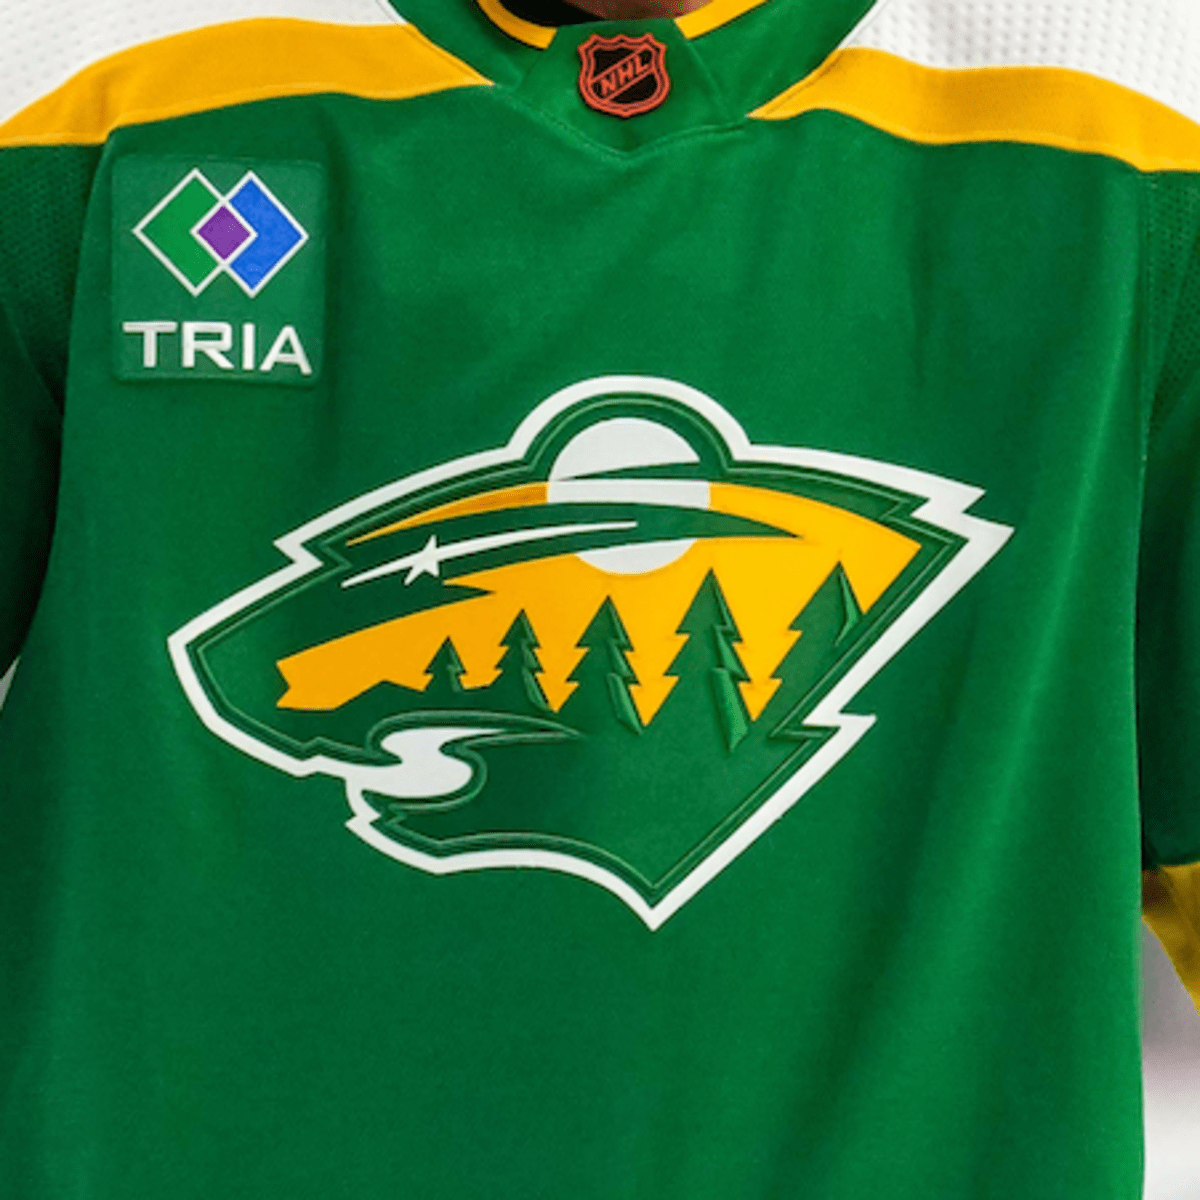 Minnesota Wild PR on X: The @NHL and @adidashockey today unveiled  #ReverseRetro jerseys for all 31 teams, including the #mnwild. Minnesota  will wear the new Reverse Retro jersey in multiple games during